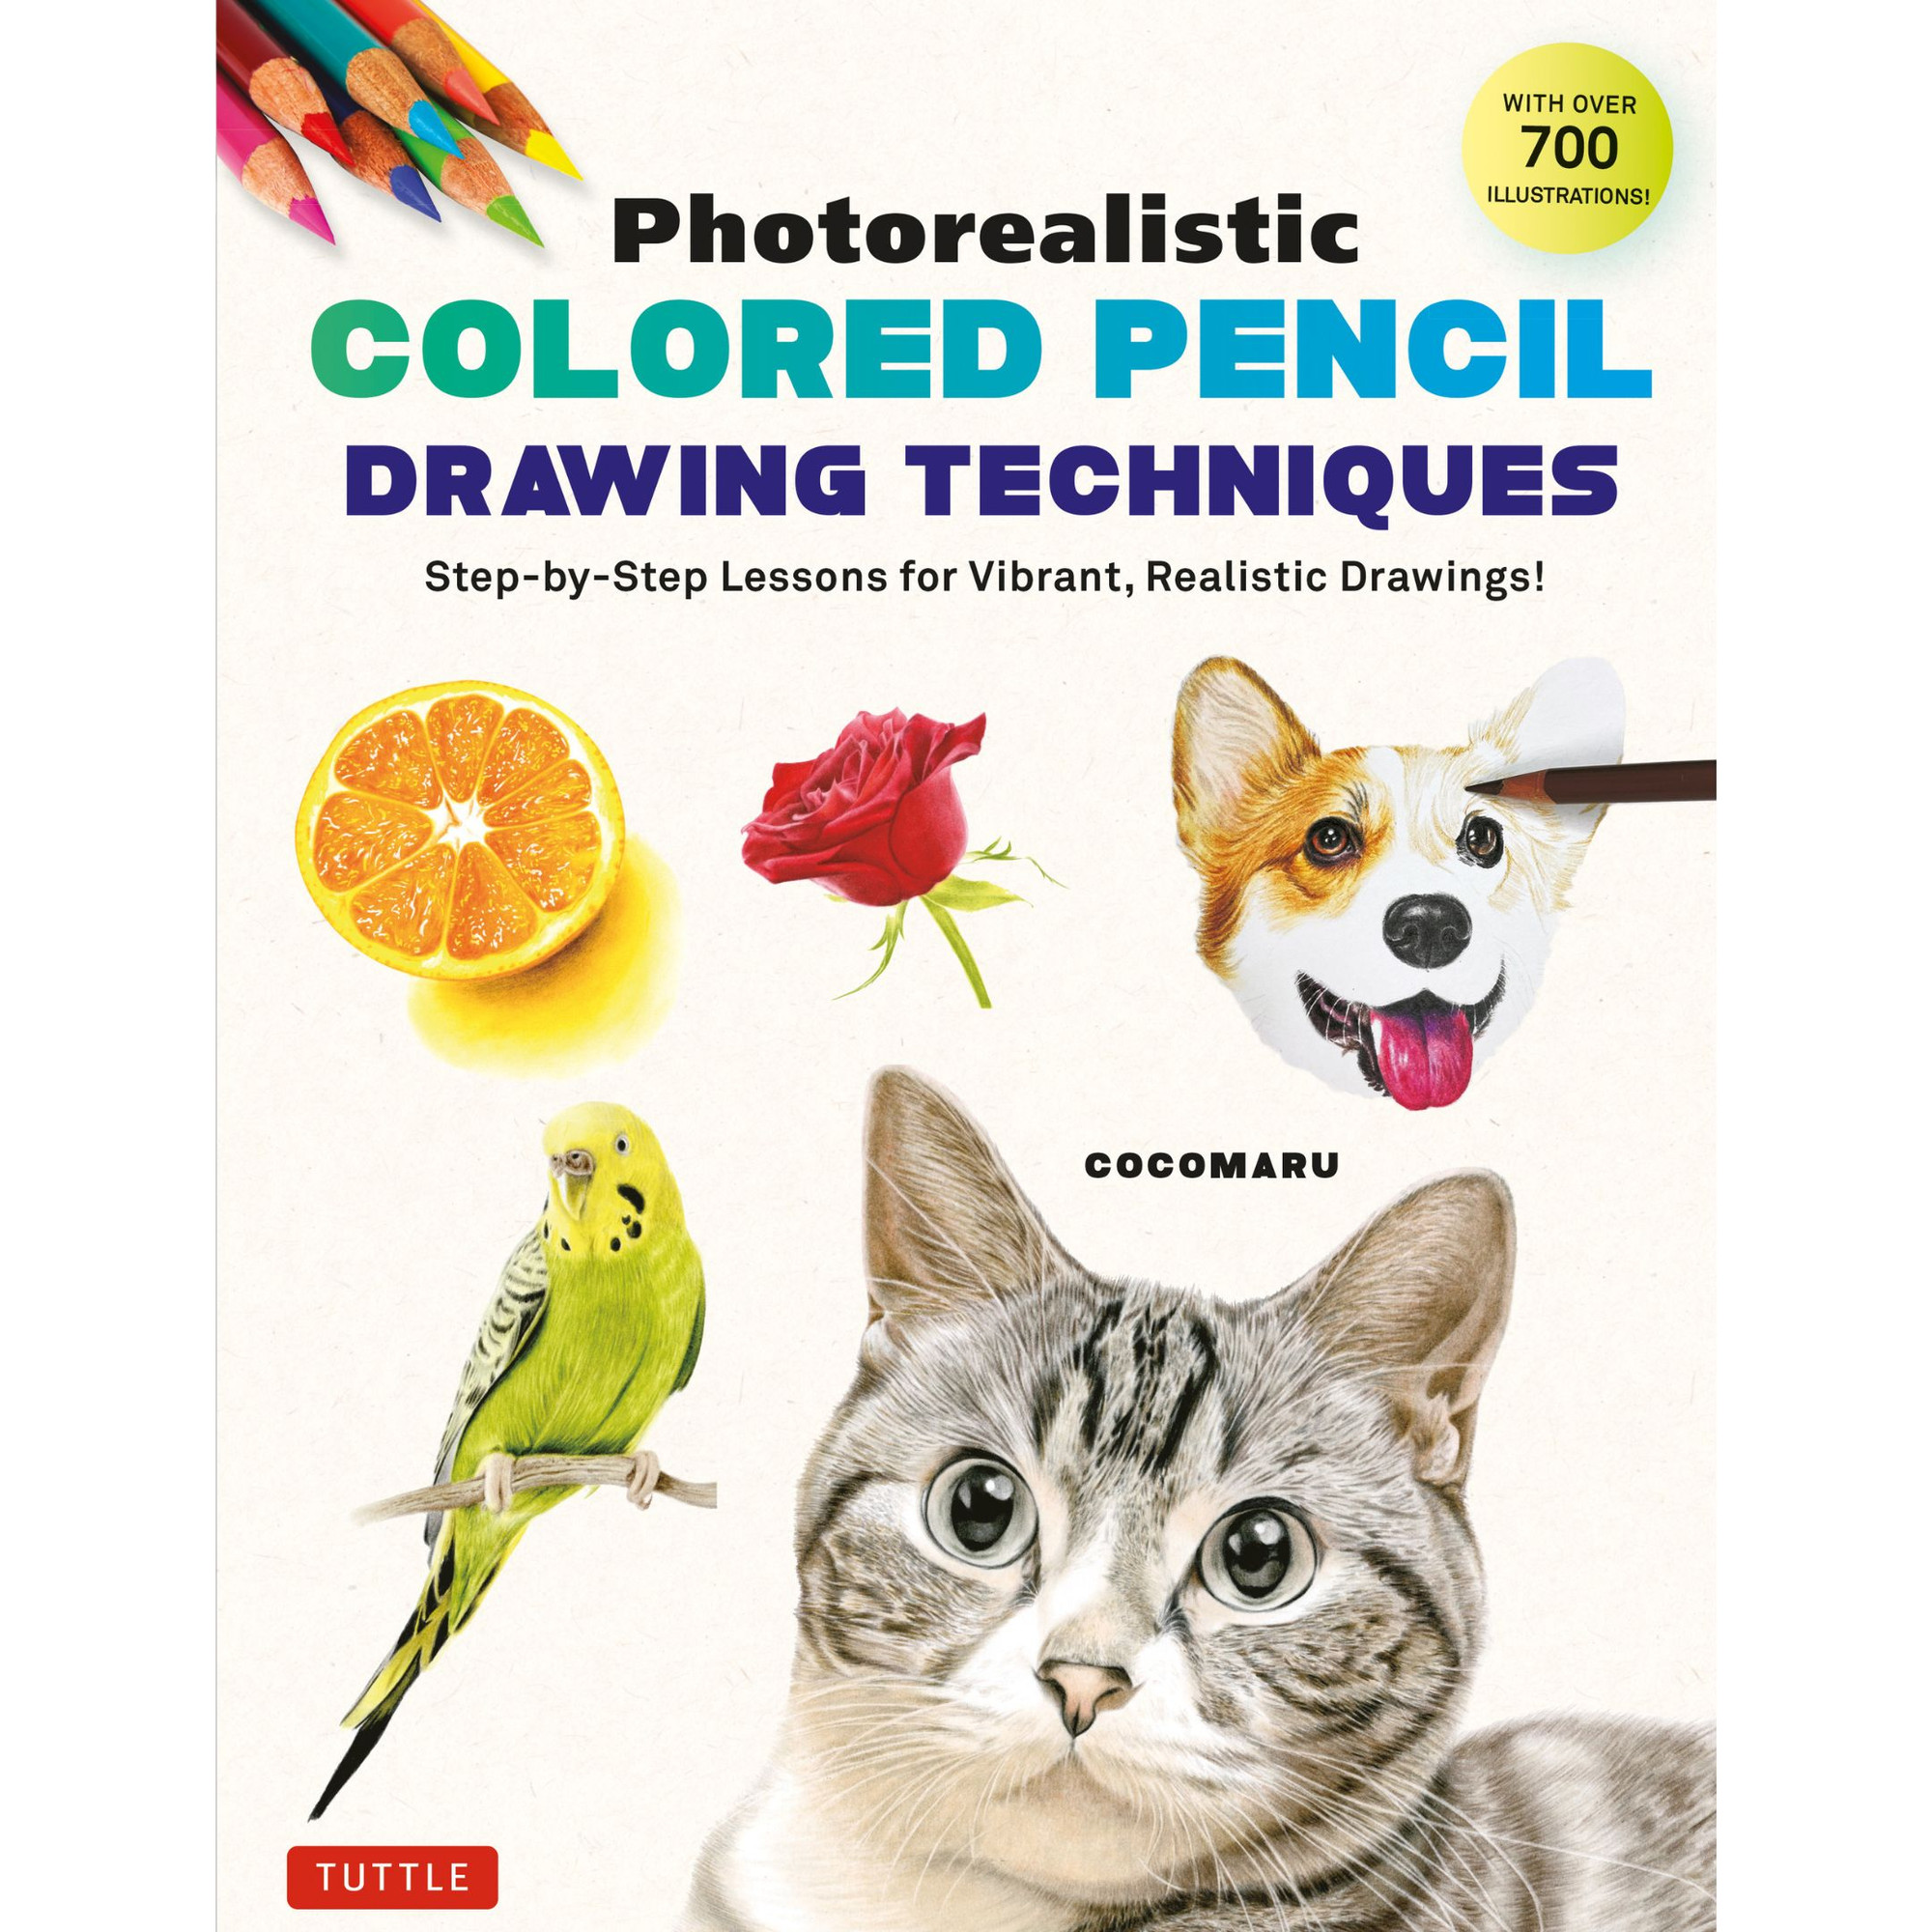 Color Pencils for Stencils and Coloring Books for Kids